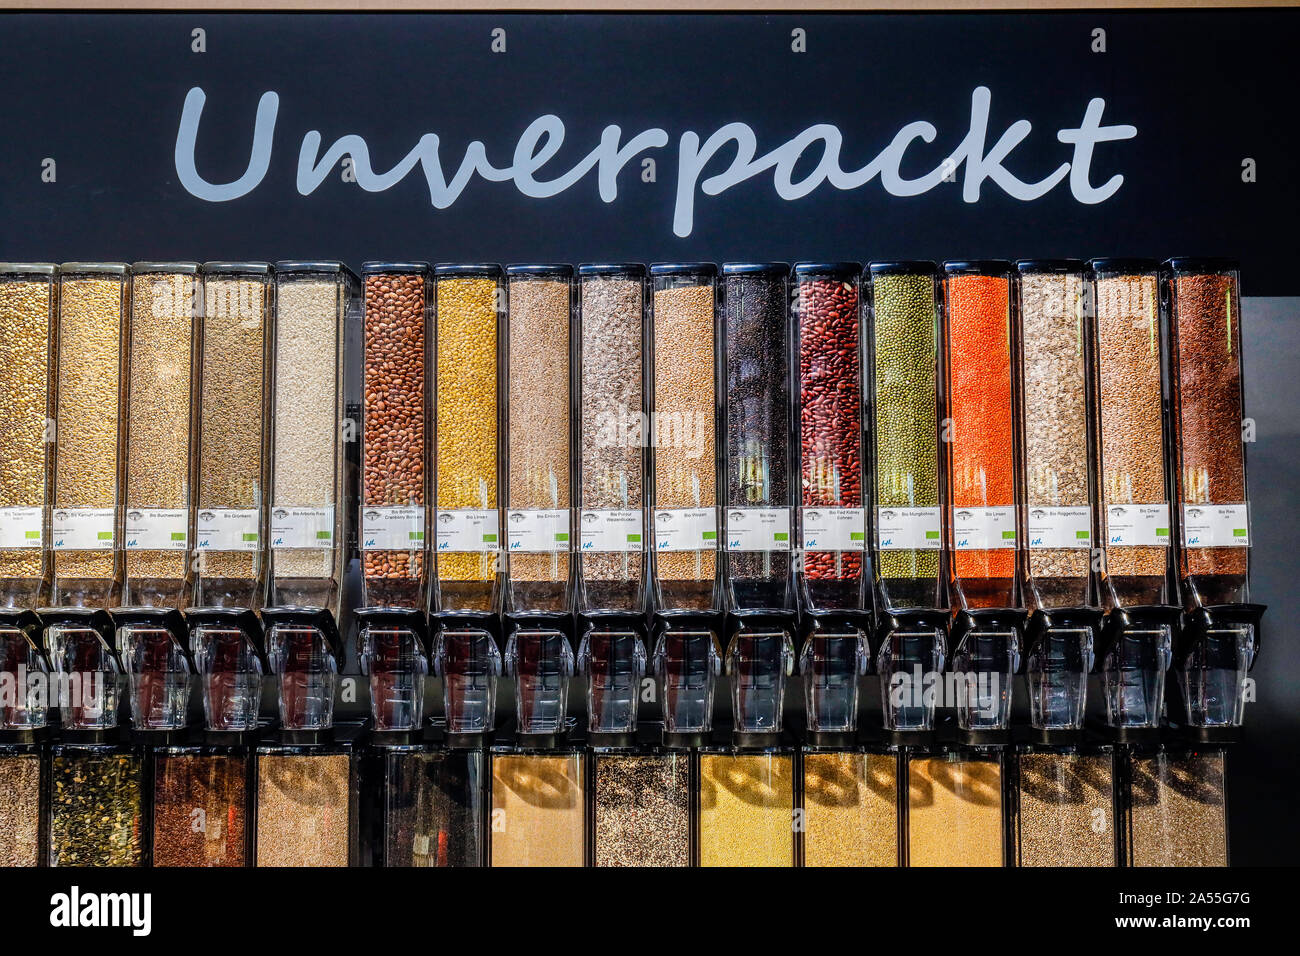 Cologne, North Rhine-Westphalia, Germany - Unpacked food at the Unverpackt booth at the Organic Market at the ANUGA food fair.  Koeln, Nordrhein-Westf Stock Photo